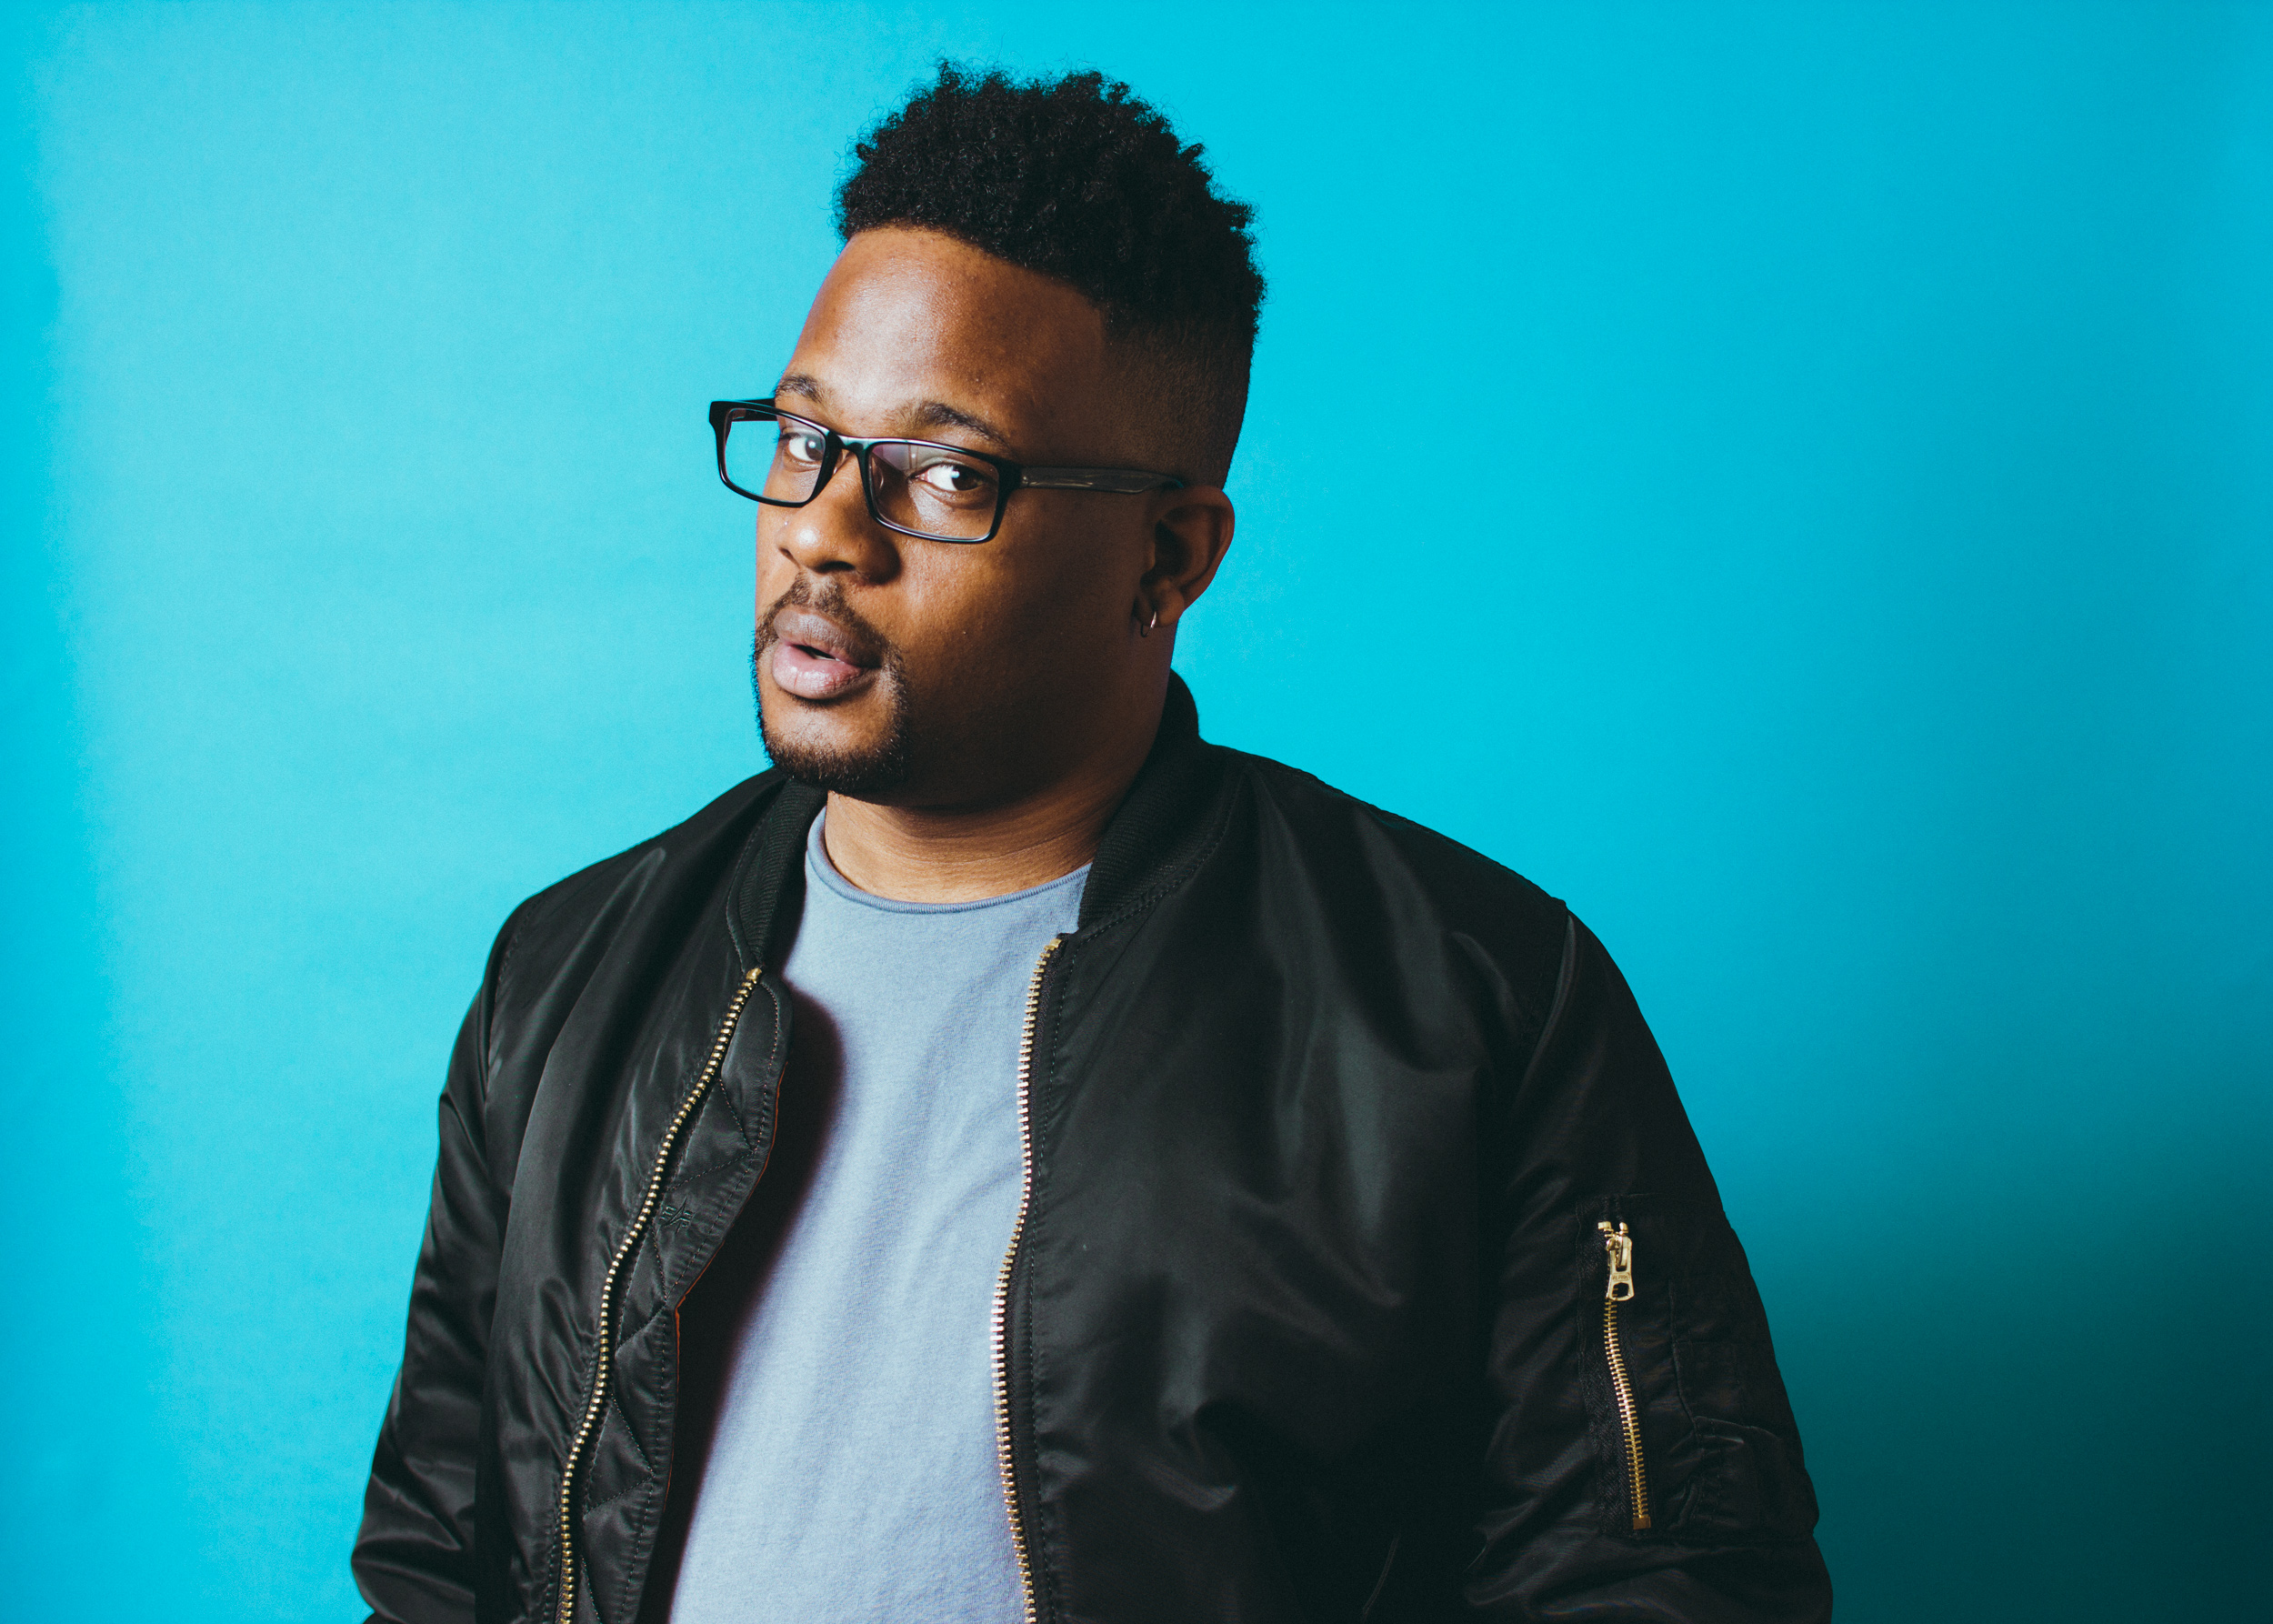 Open Mike Eagle by Andy J Scott